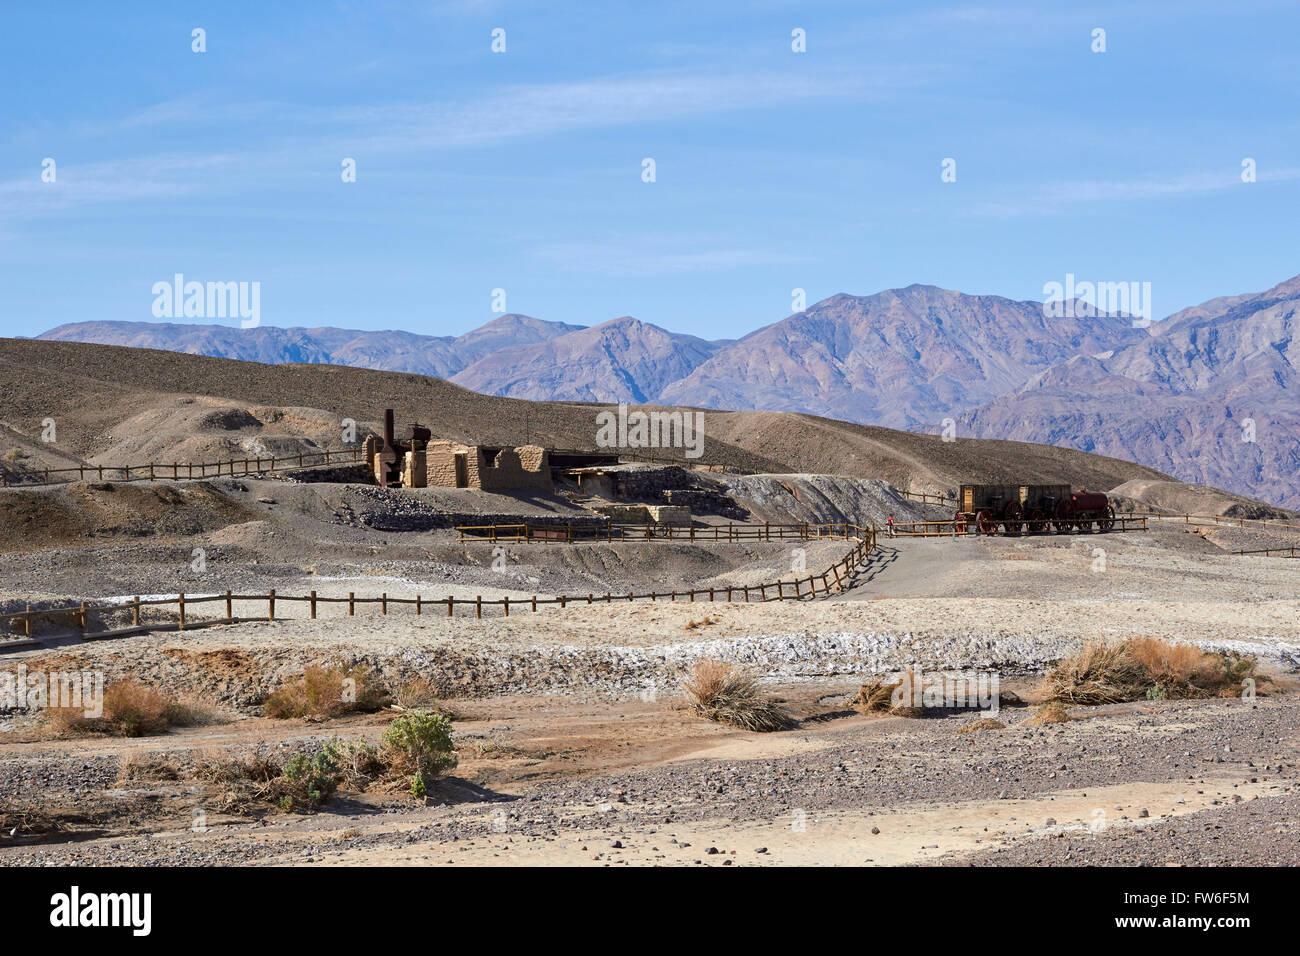 Harmony Borax Works, Death Valley National Park, California, USA Banque D'Images